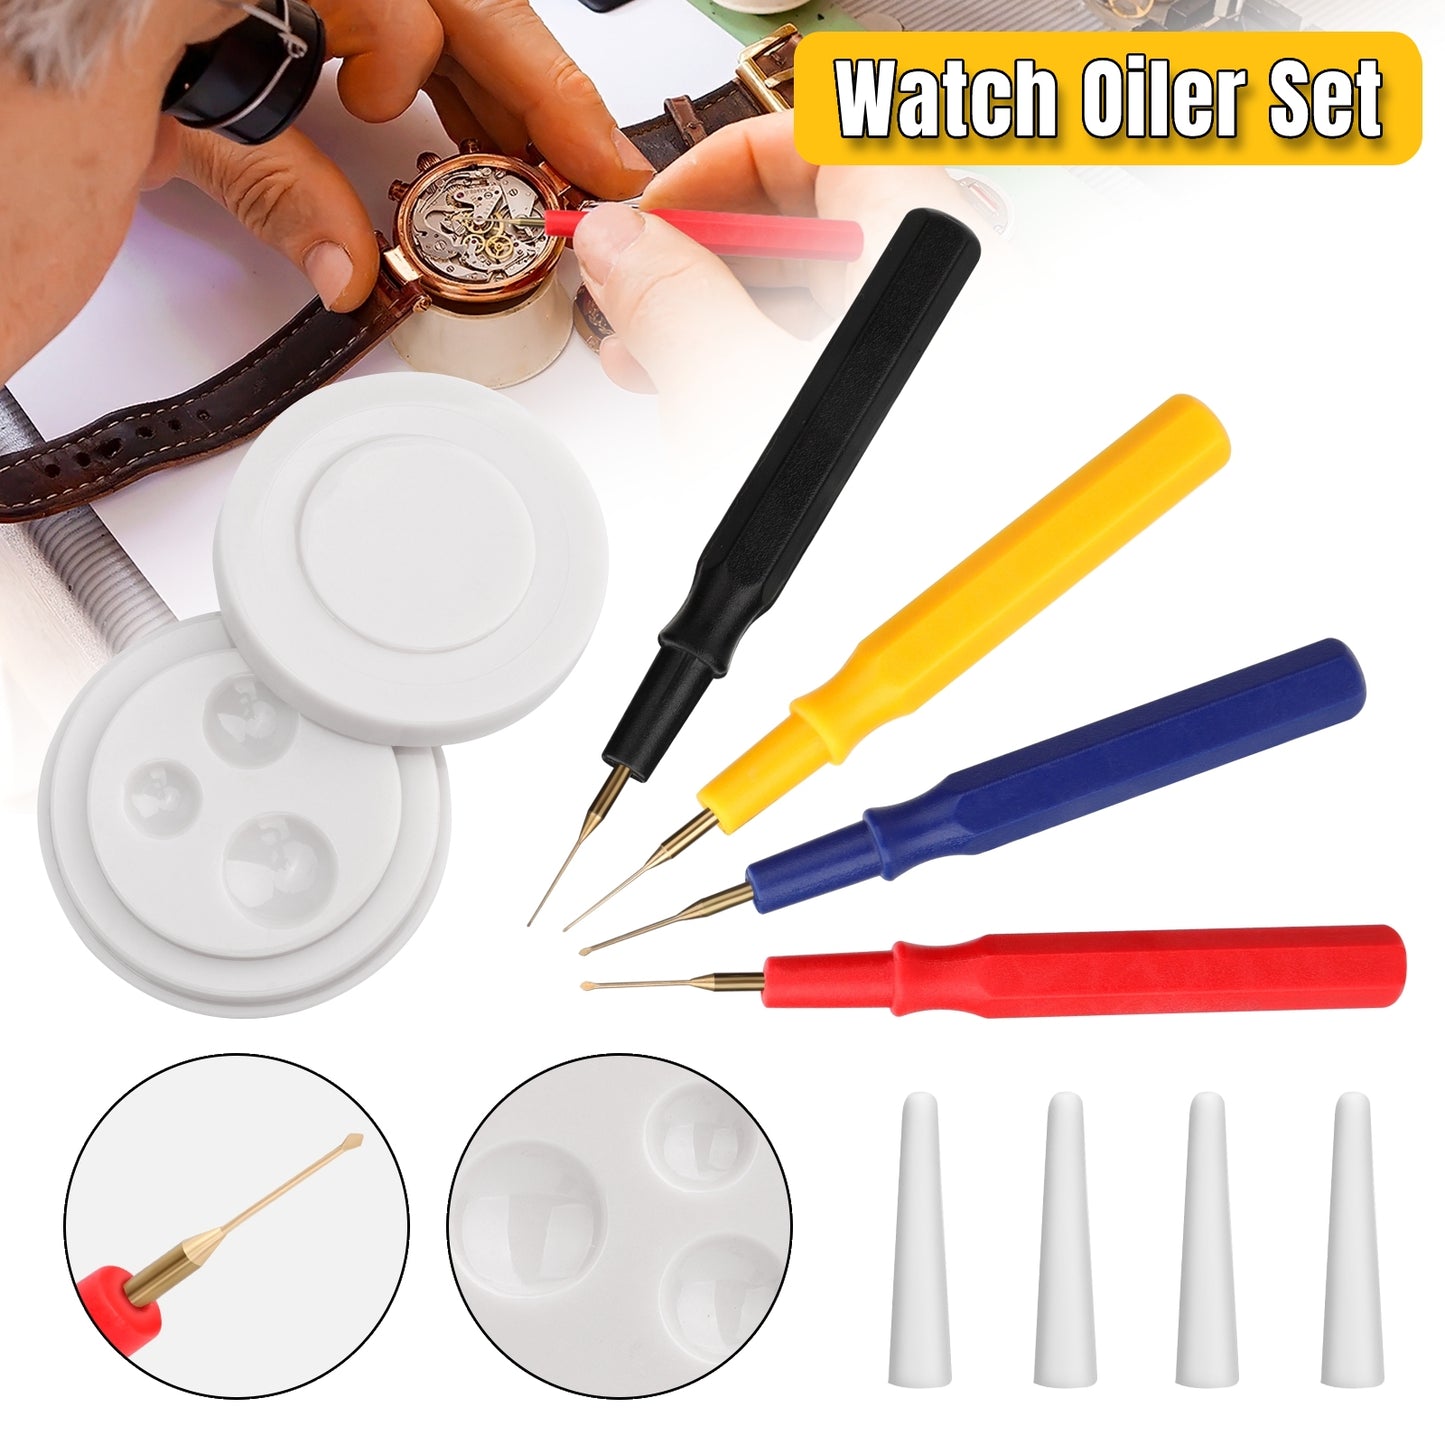 Precision Watch Oiler Set - 4 Different Size Oiler Pen Needle With 1 Oil Cup Ideal for  Watchmaker Watches Clocks Repair